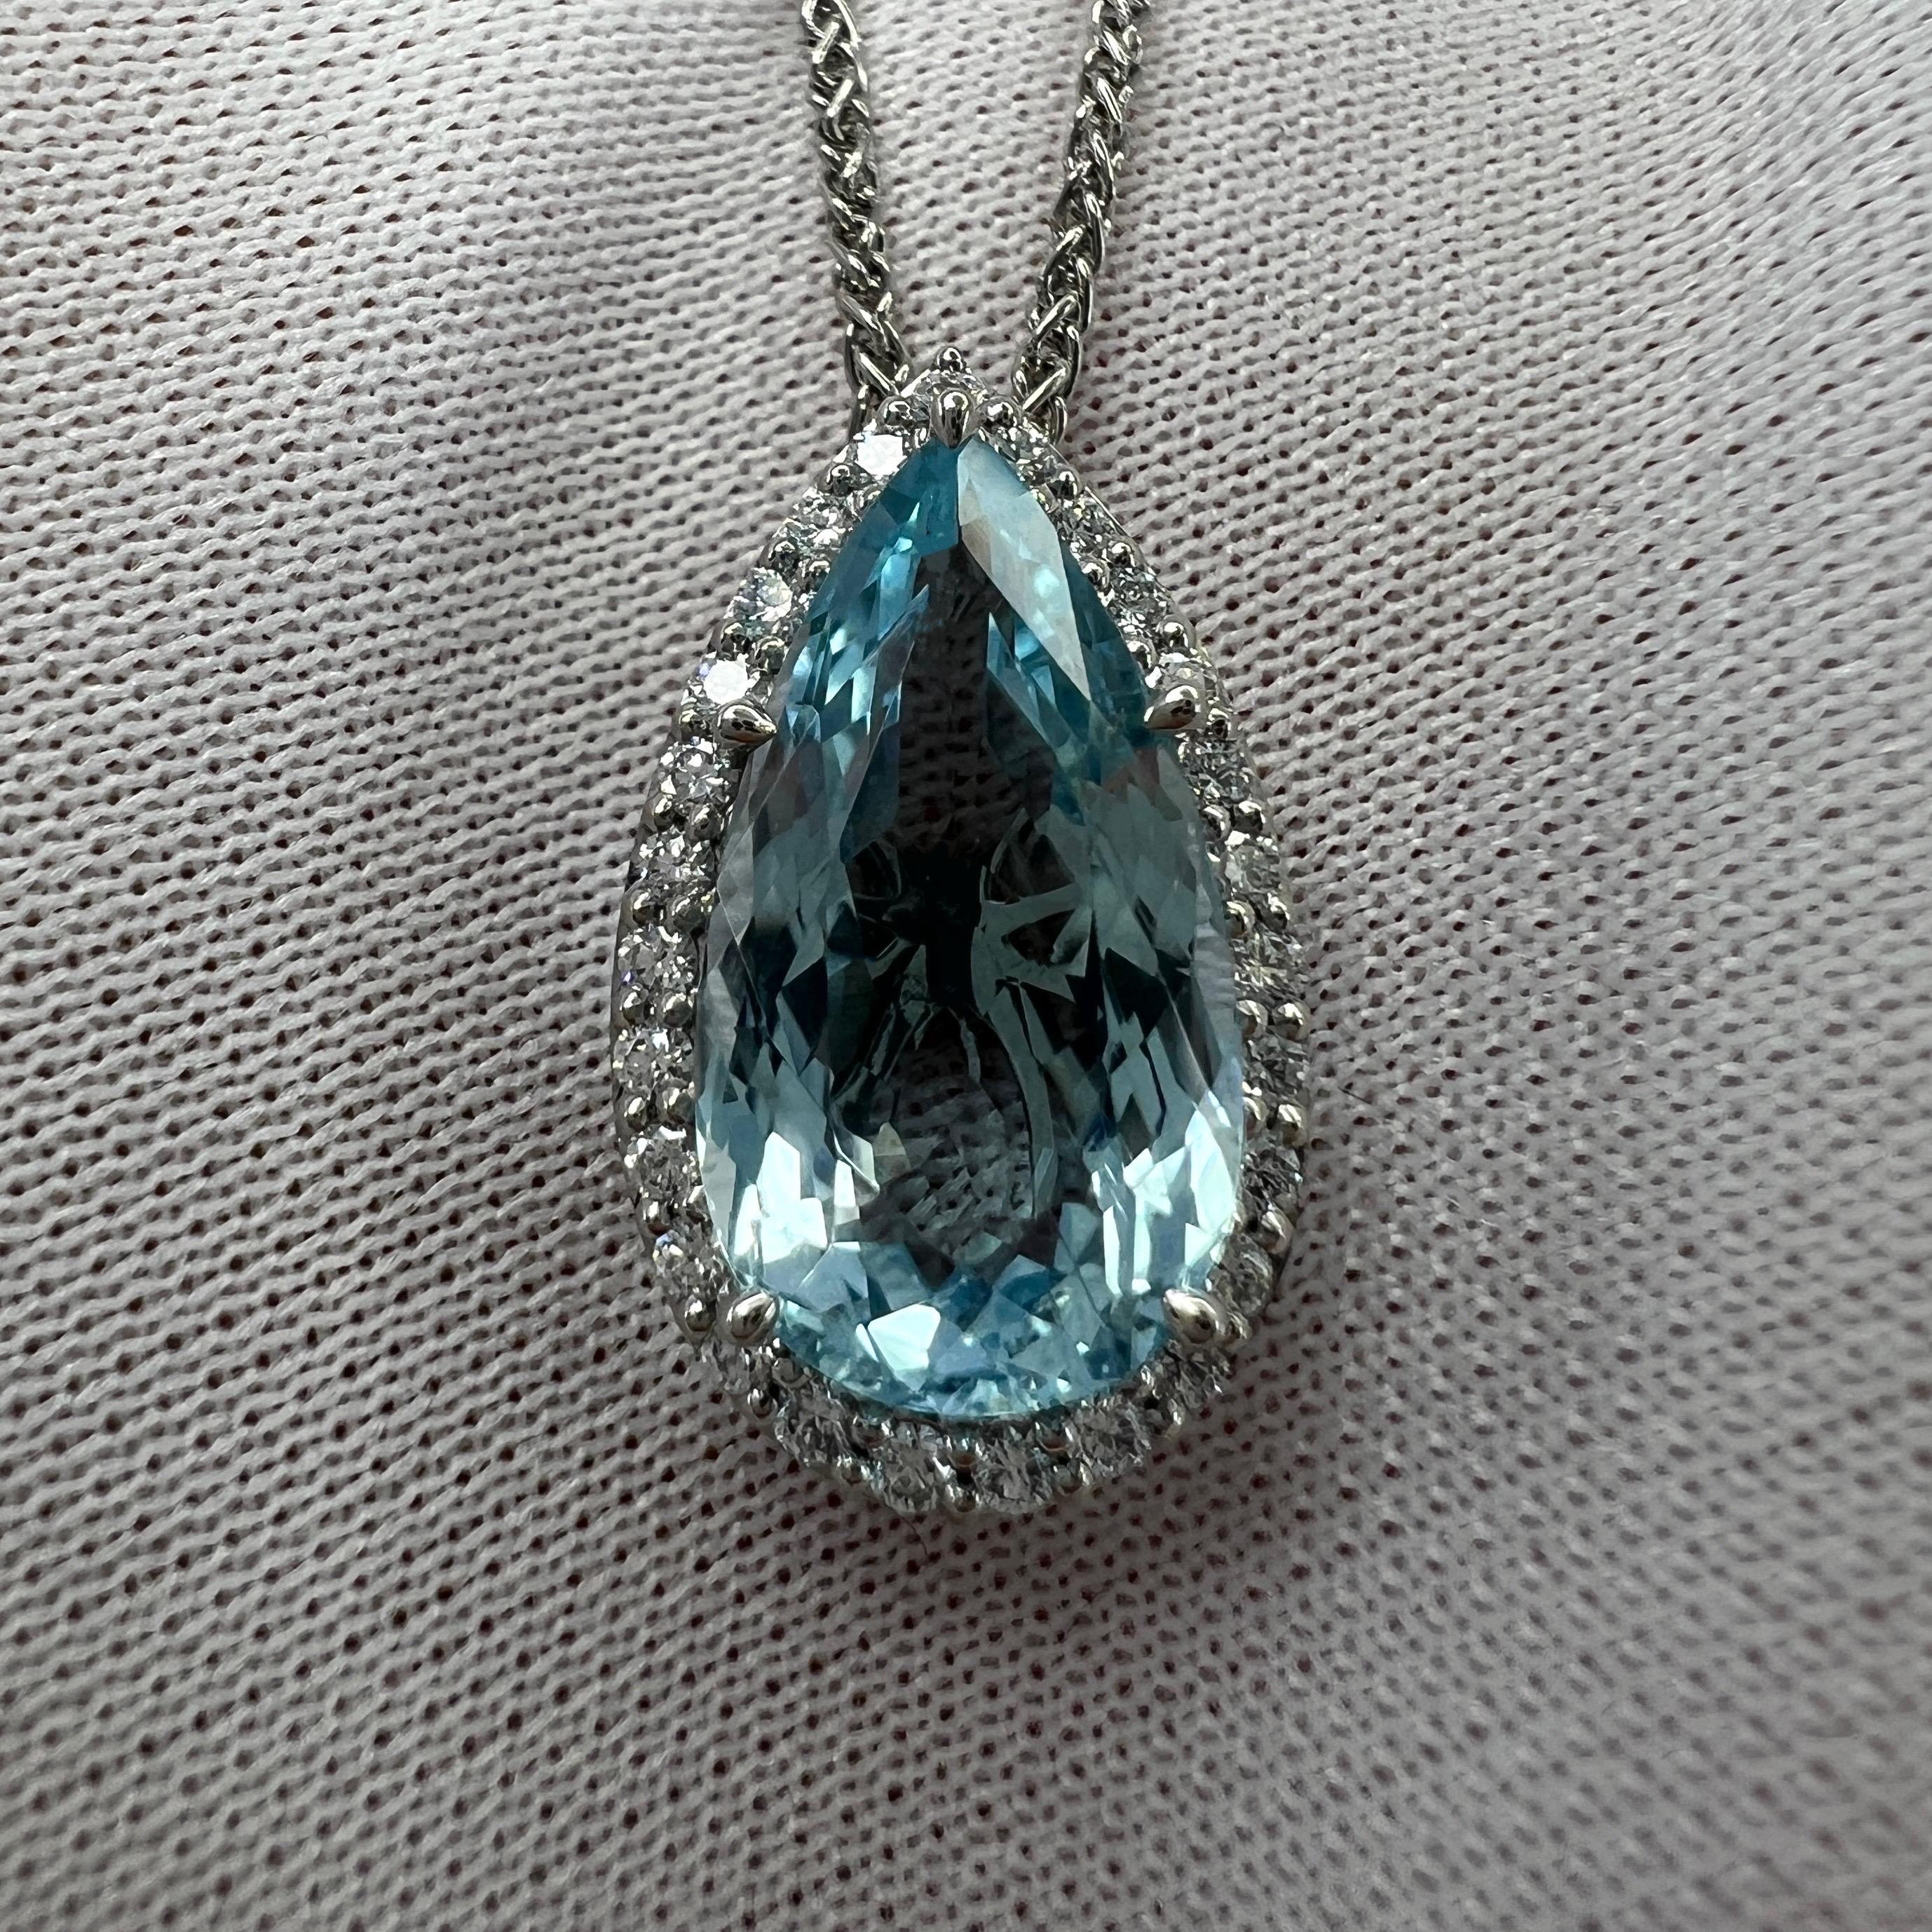 Fine Blue Natural Pear Cut Aquamarine & Diamond Platinum Halo Pendant Necklace.

4.17 Carat aquamarine with a stunning fine blue colour and excellent clarity, very clean stone. Practically flawless. 
Also has an excellent pear teardrop cut showing